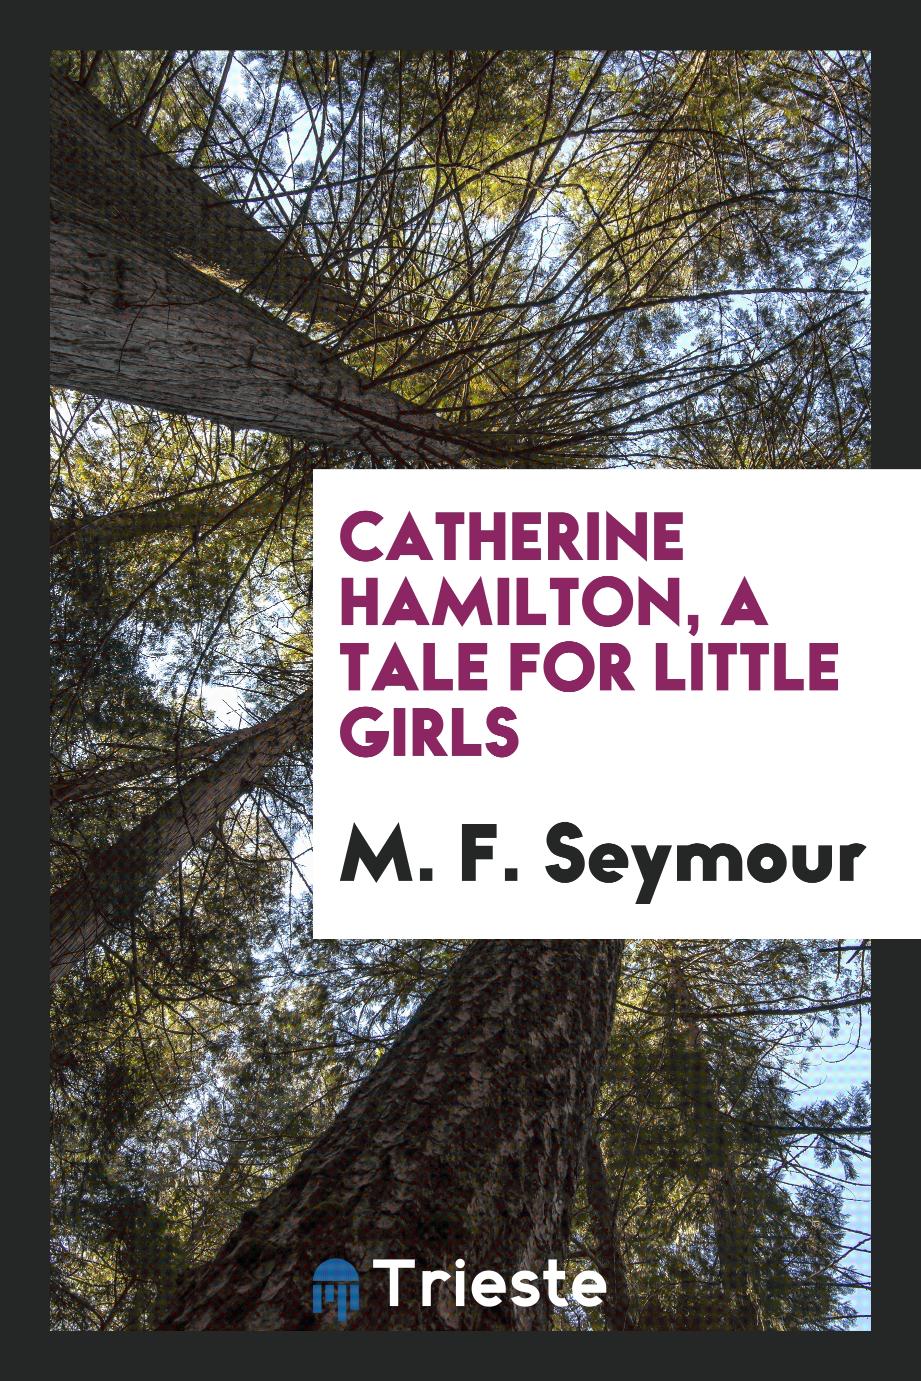 Catherine Hamilton, a Tale for Little Girls